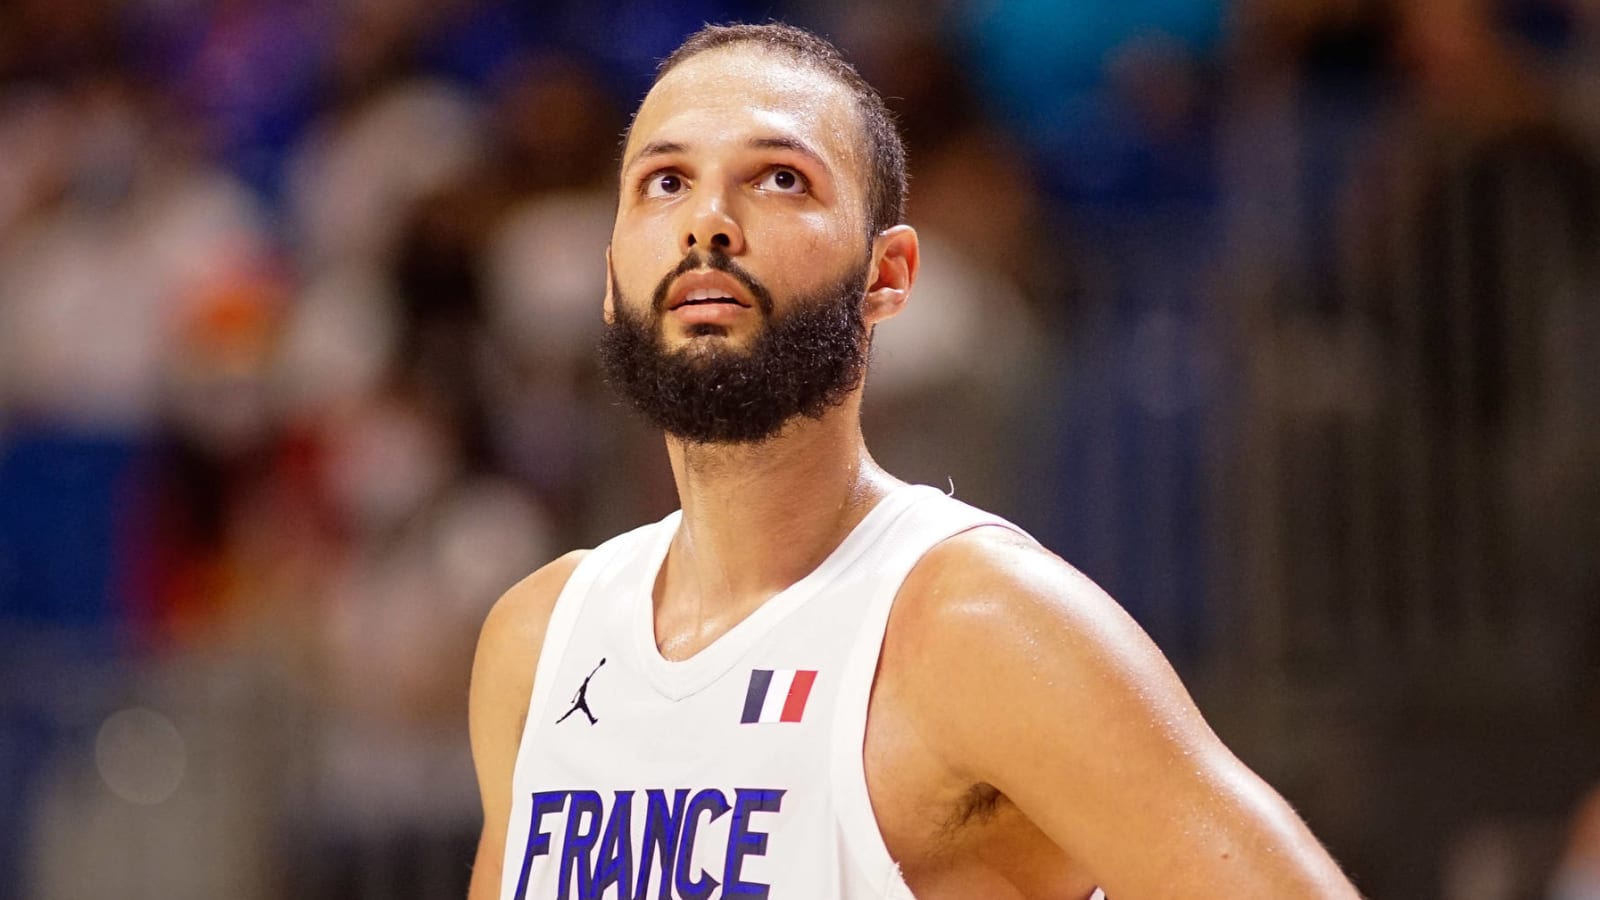 Evan Fournier takes shot at Kevin Durant over his hair